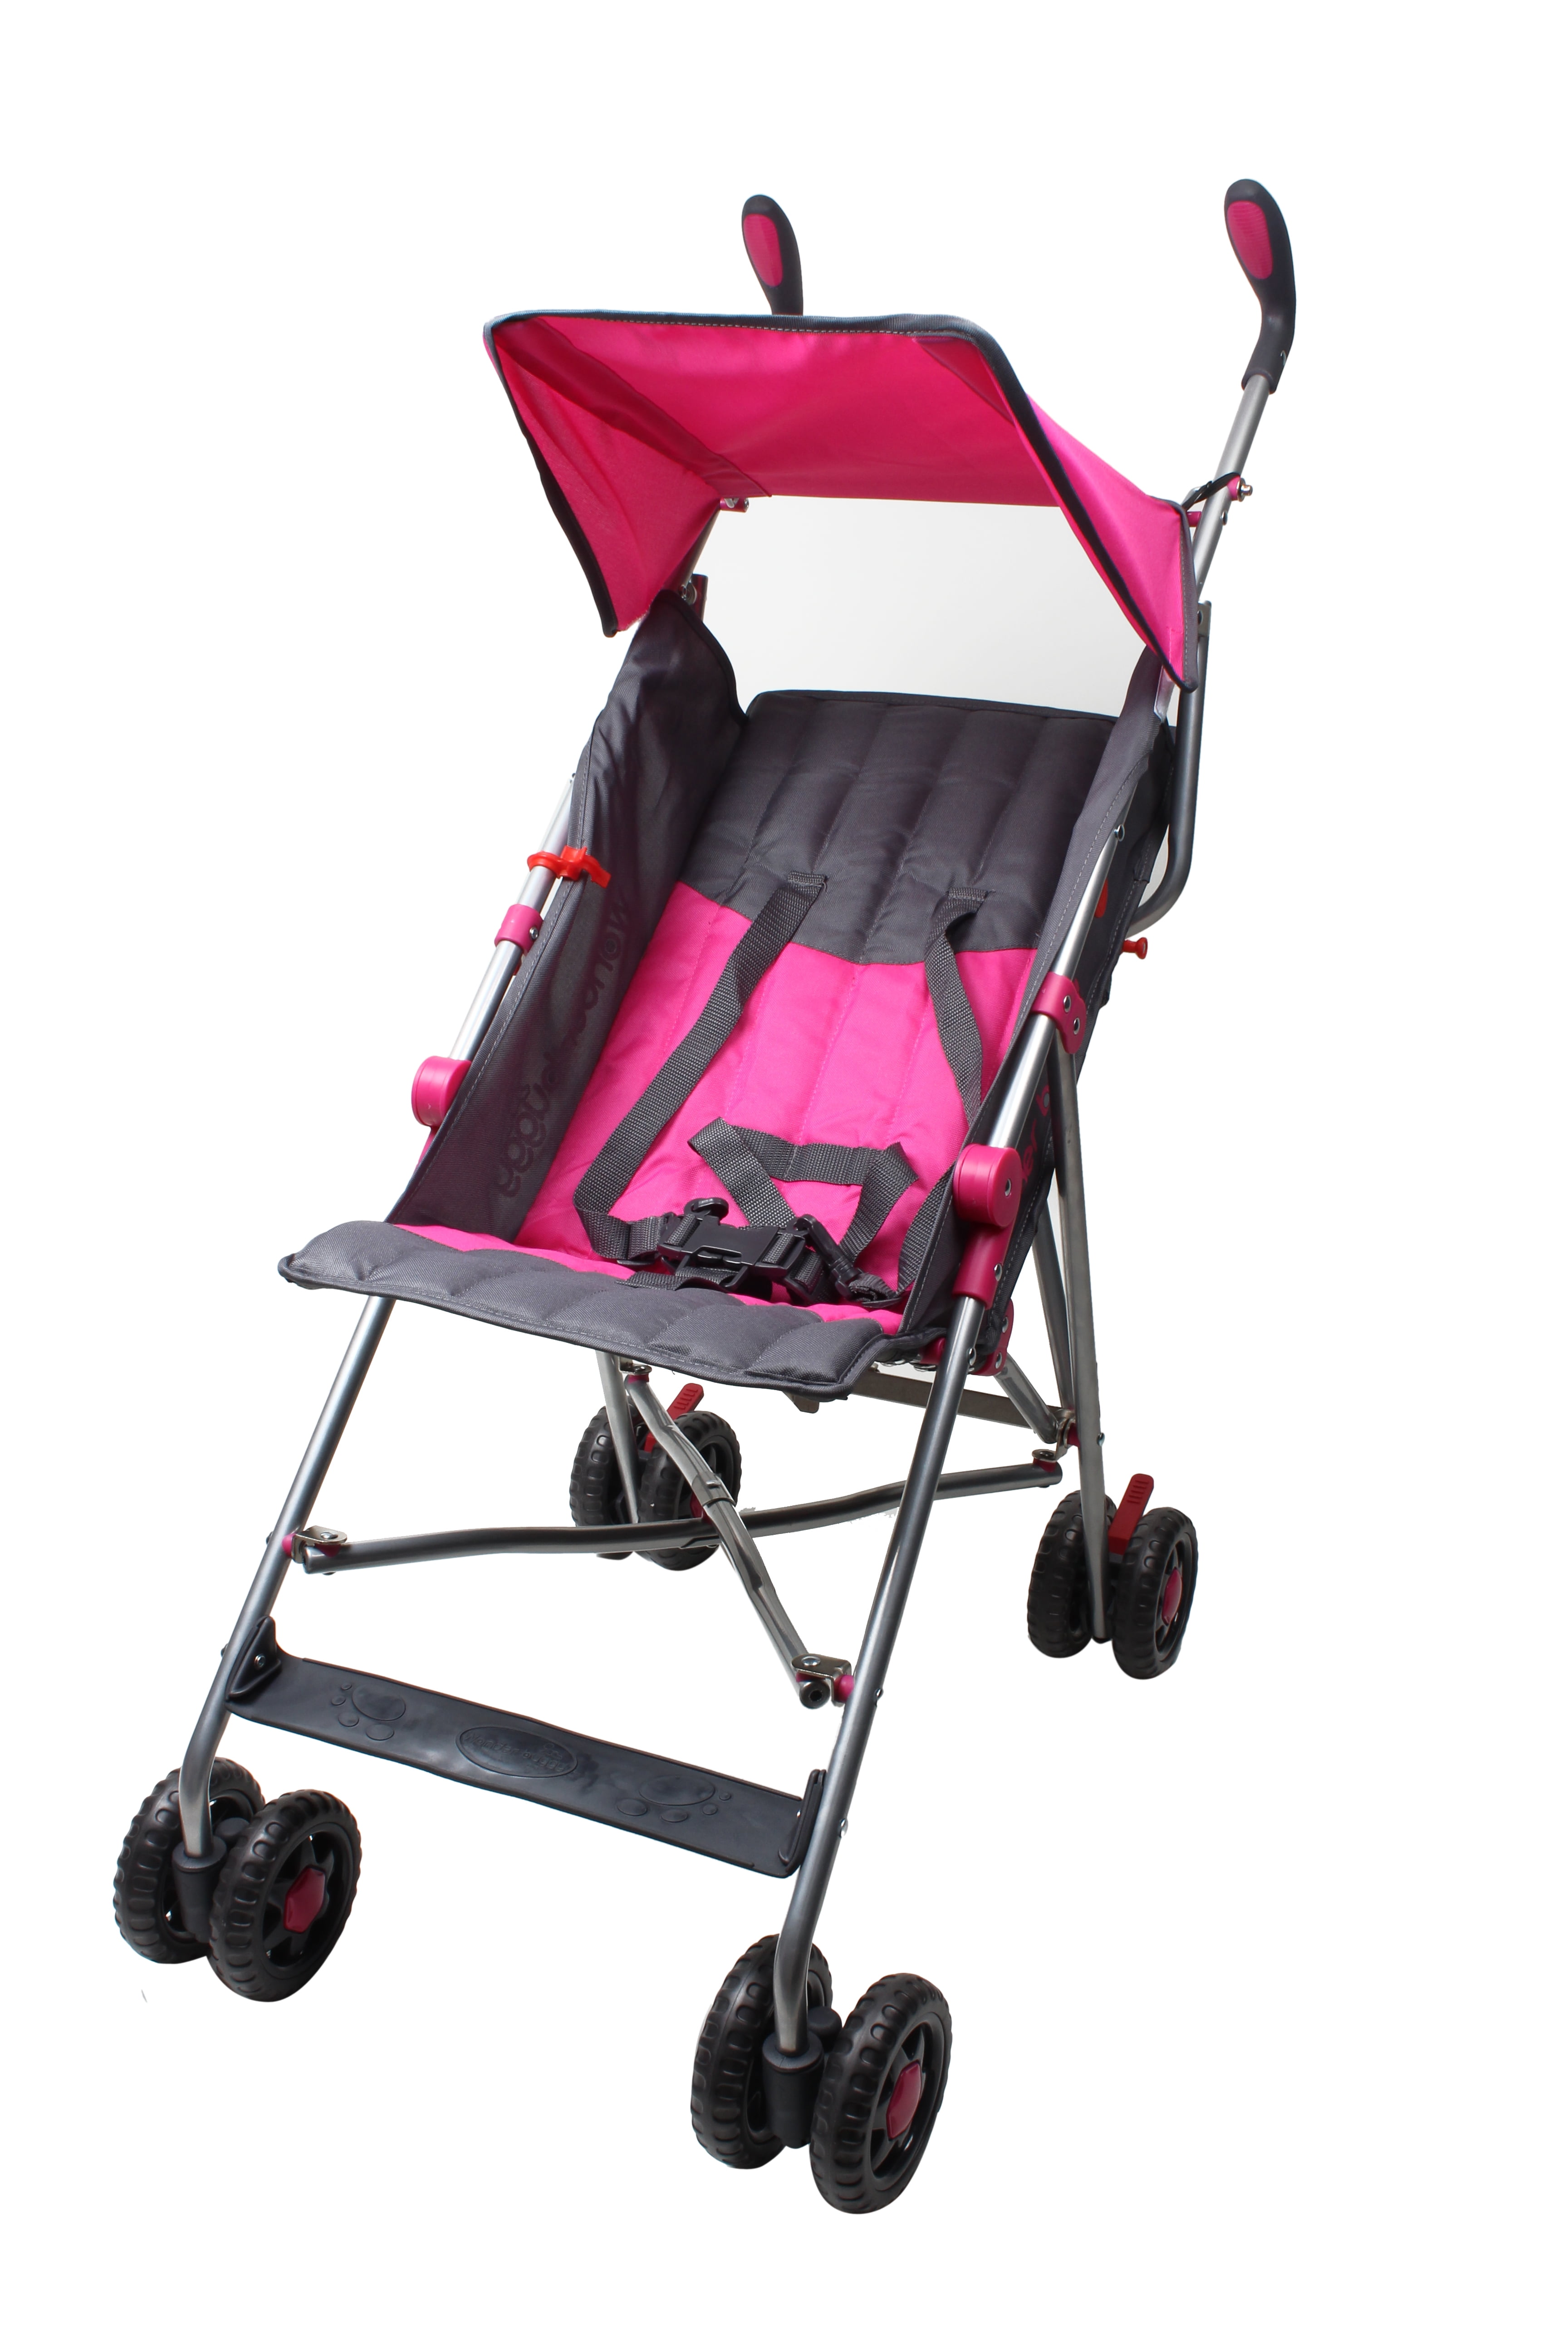 wonder buggy dakota deluxe two position stroller with canopy & storage basket